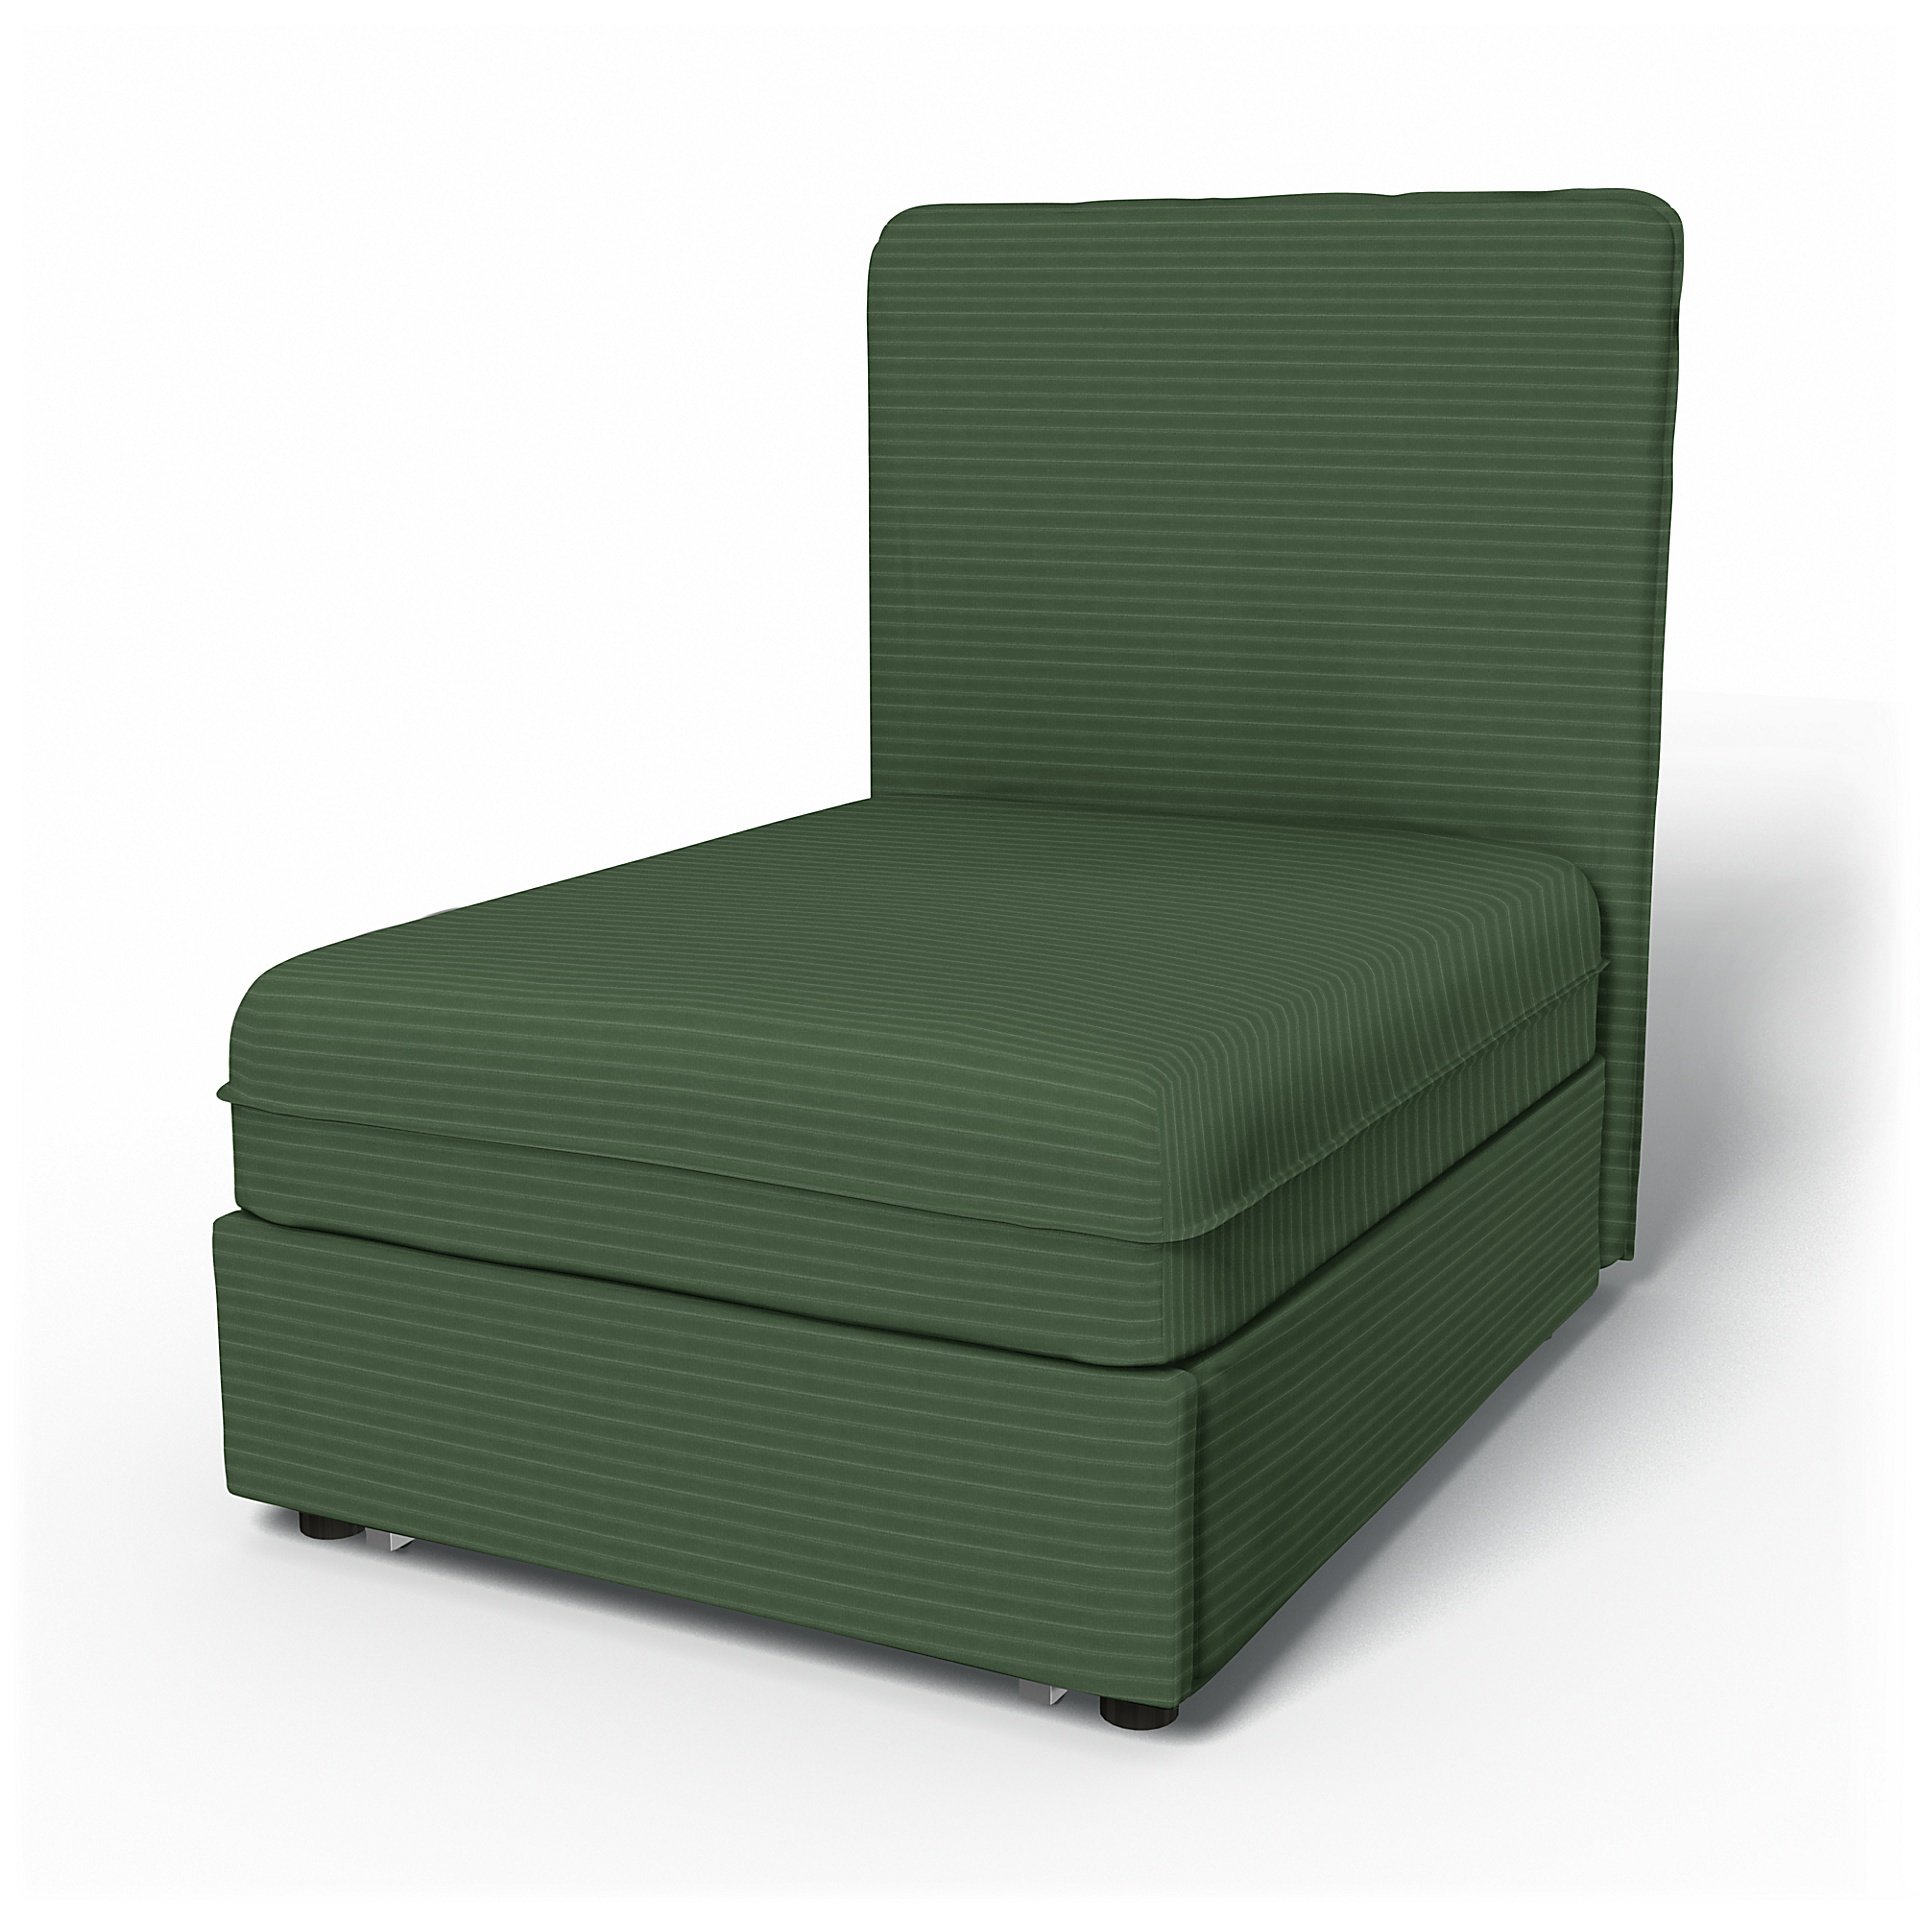 IKEA - Vallentuna Seat Module with High Back Sofa Bed Cover (80x100x46cm), Palm Green, Corduroy - Be